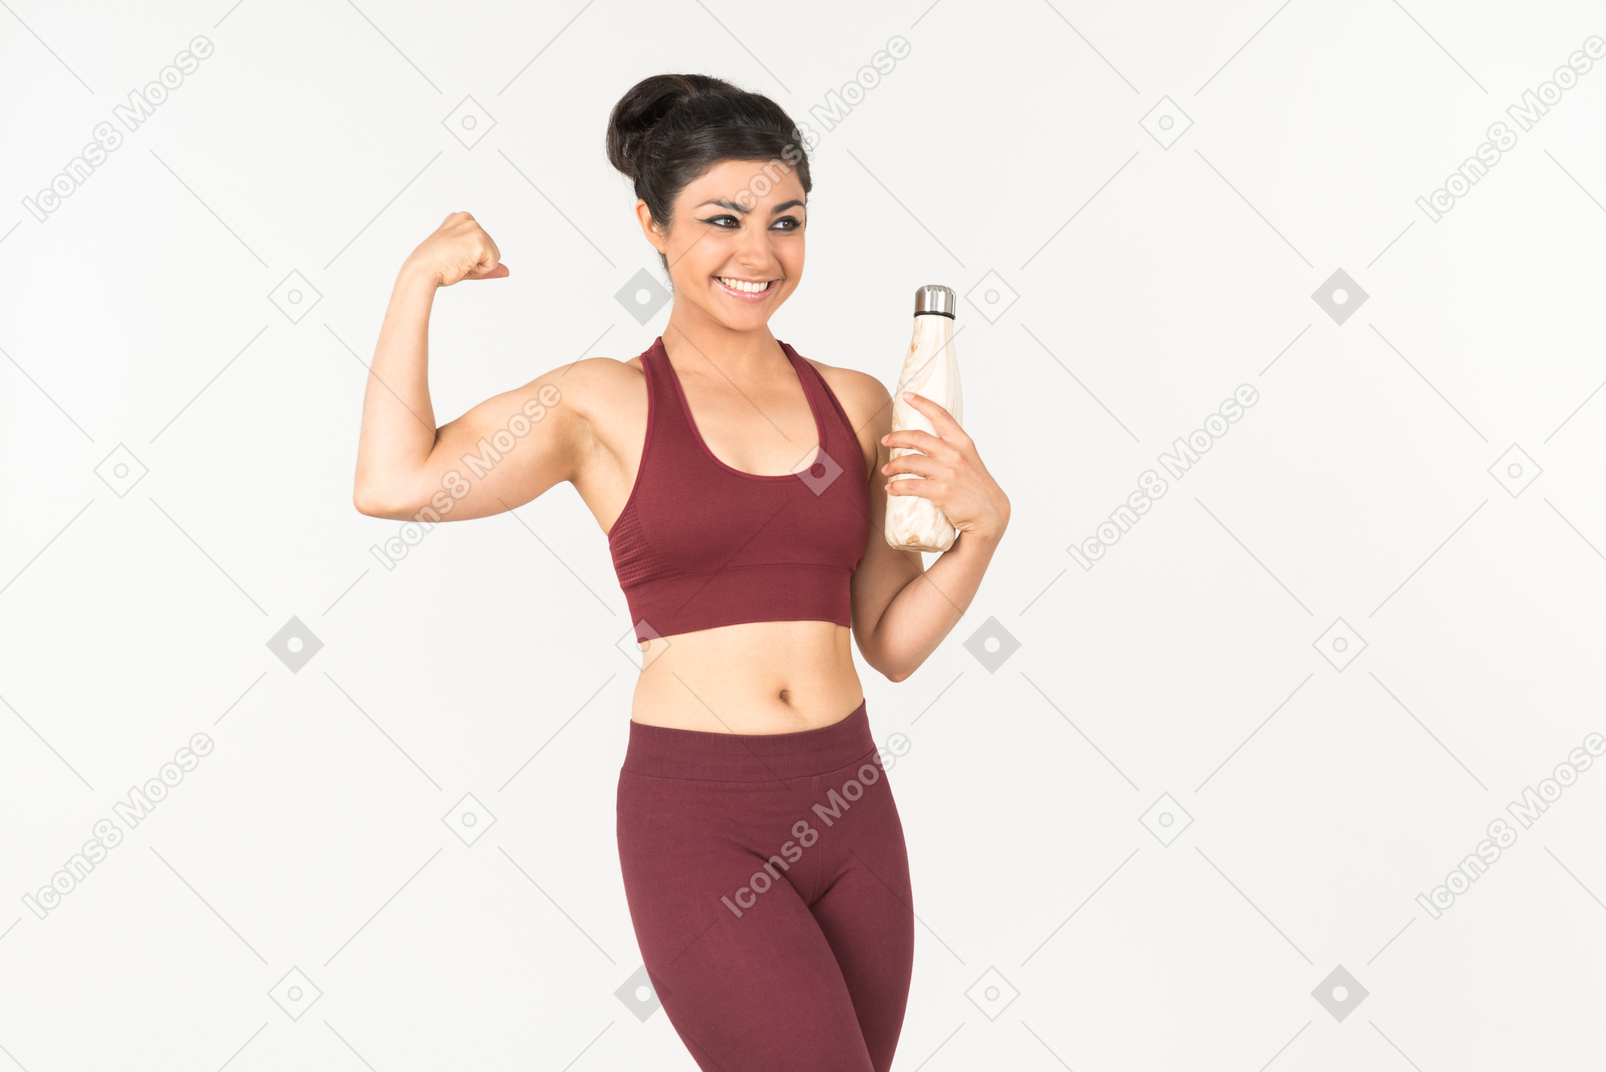 Young indian woman in sporstwear holding sport bottle and showing muscles